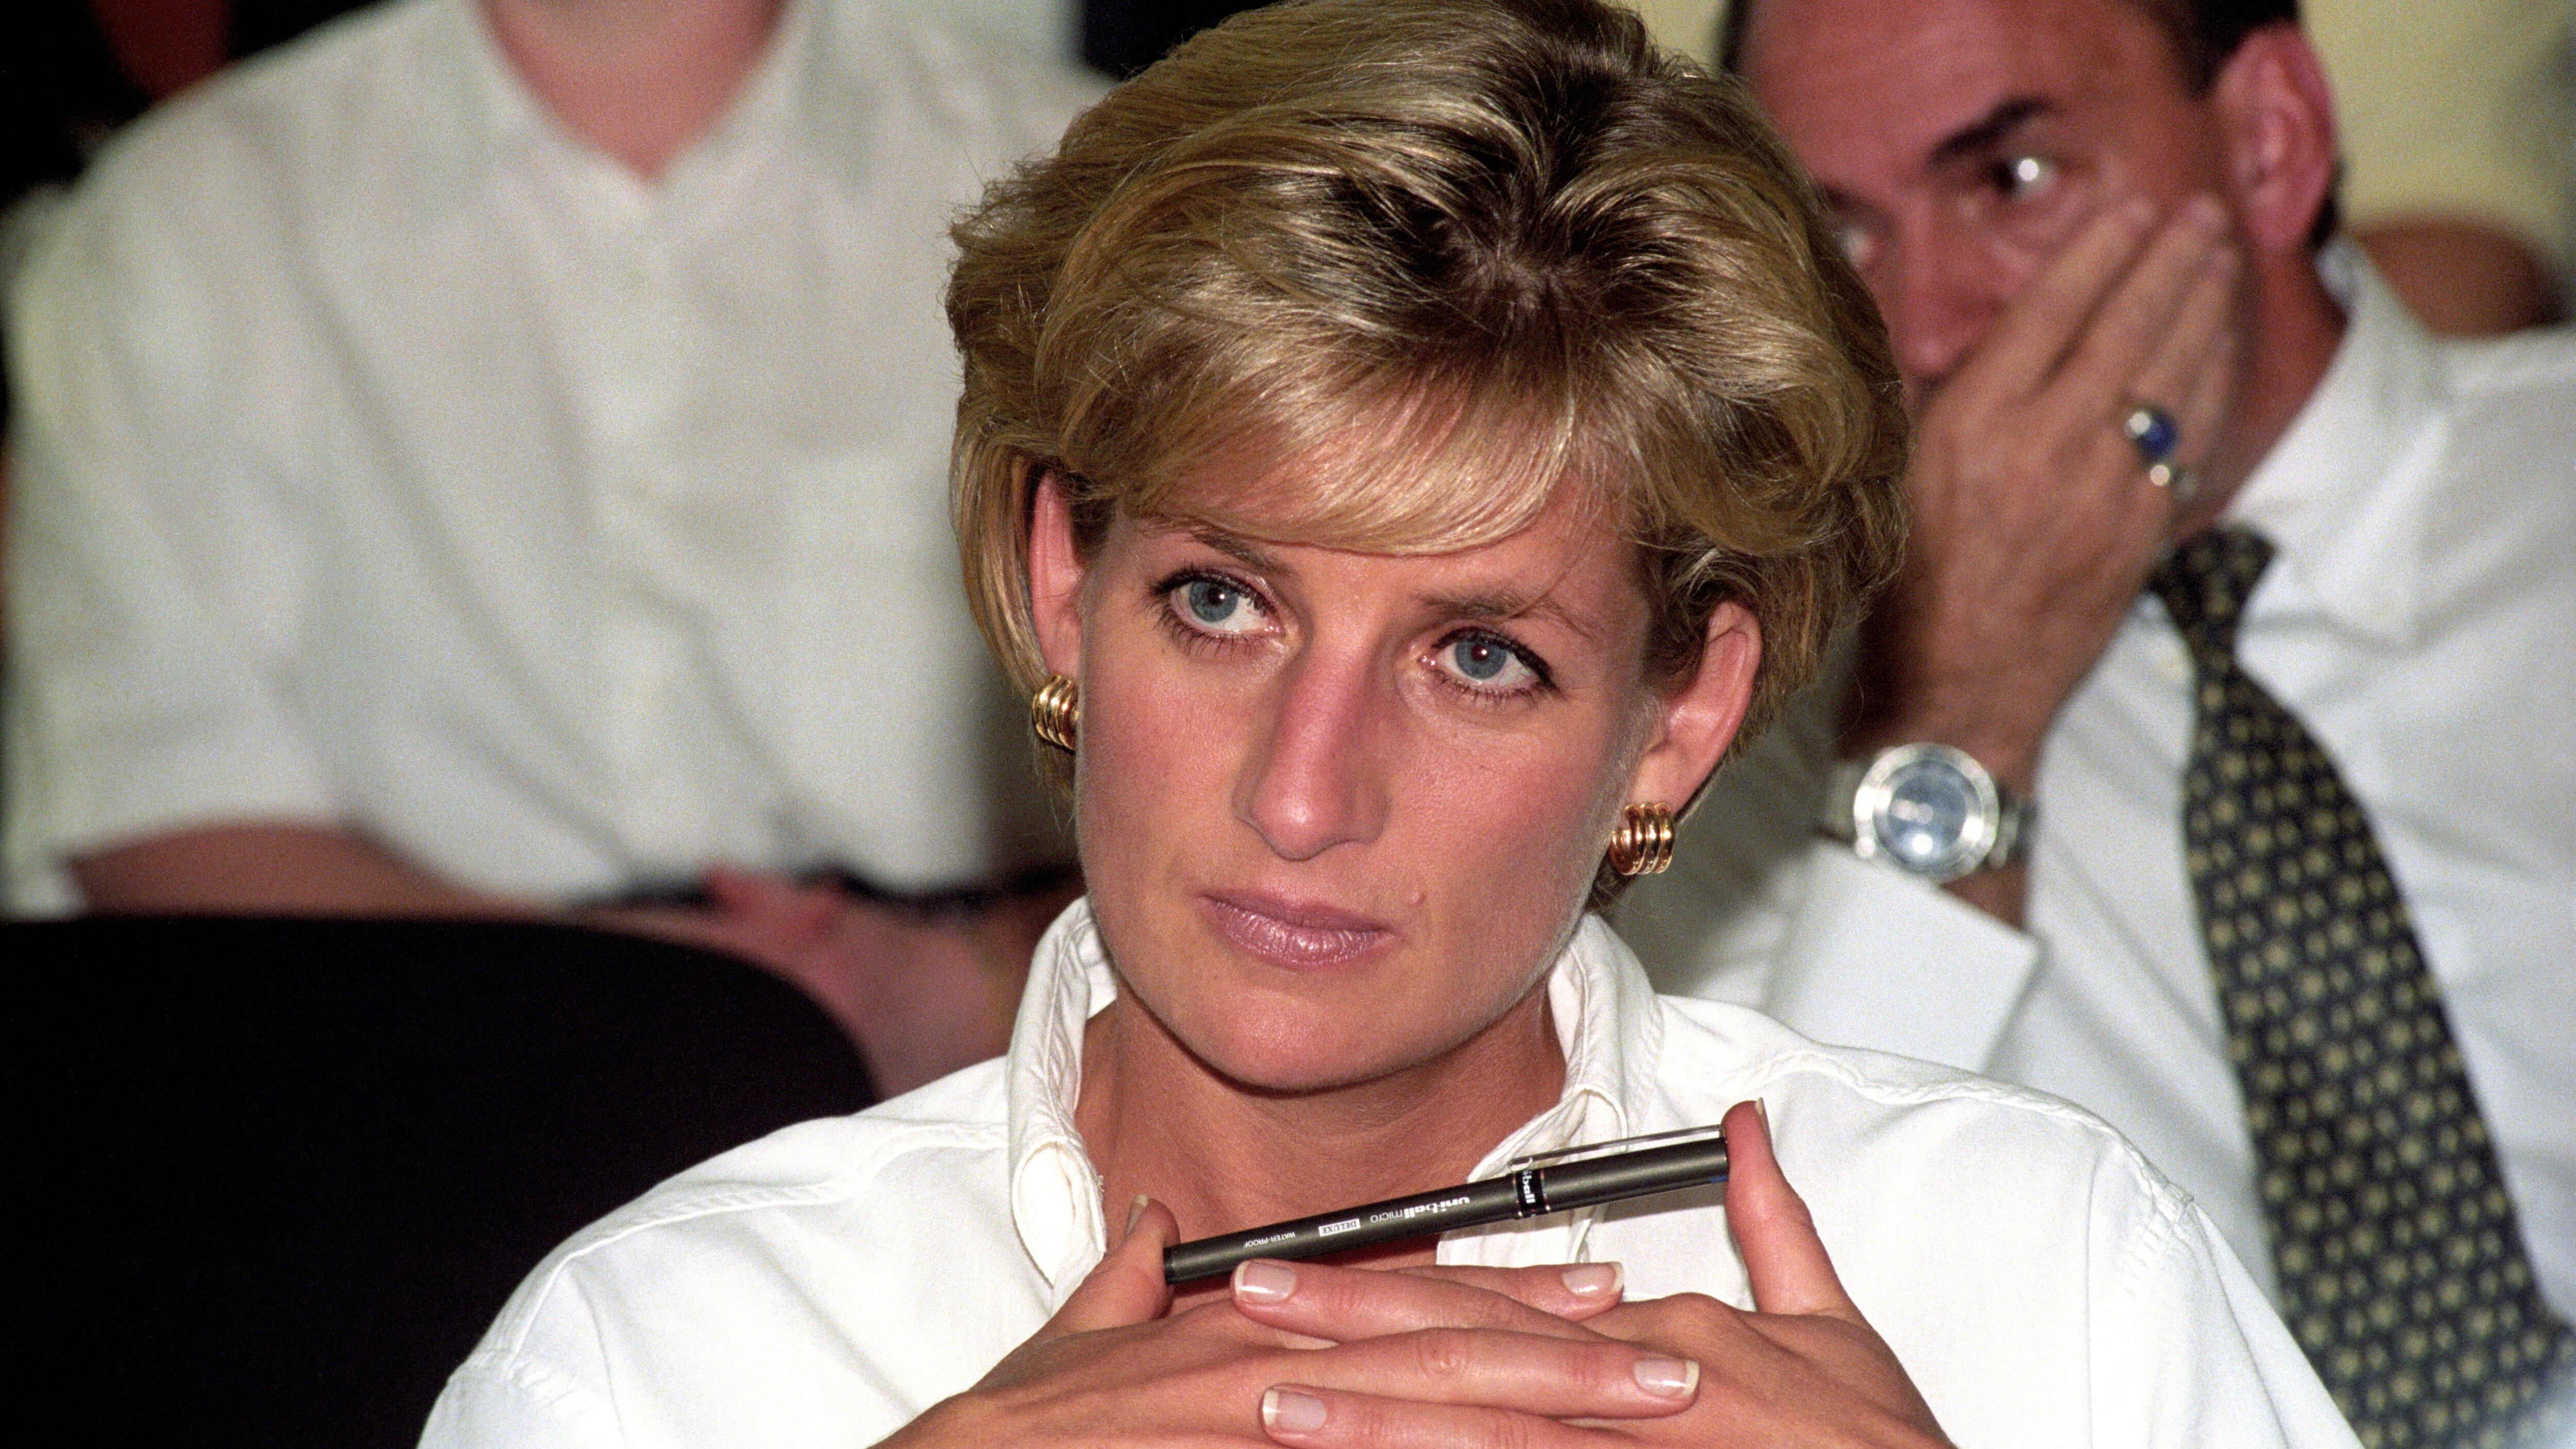 The programme is expected to cover the aftermath of Diana’s death.